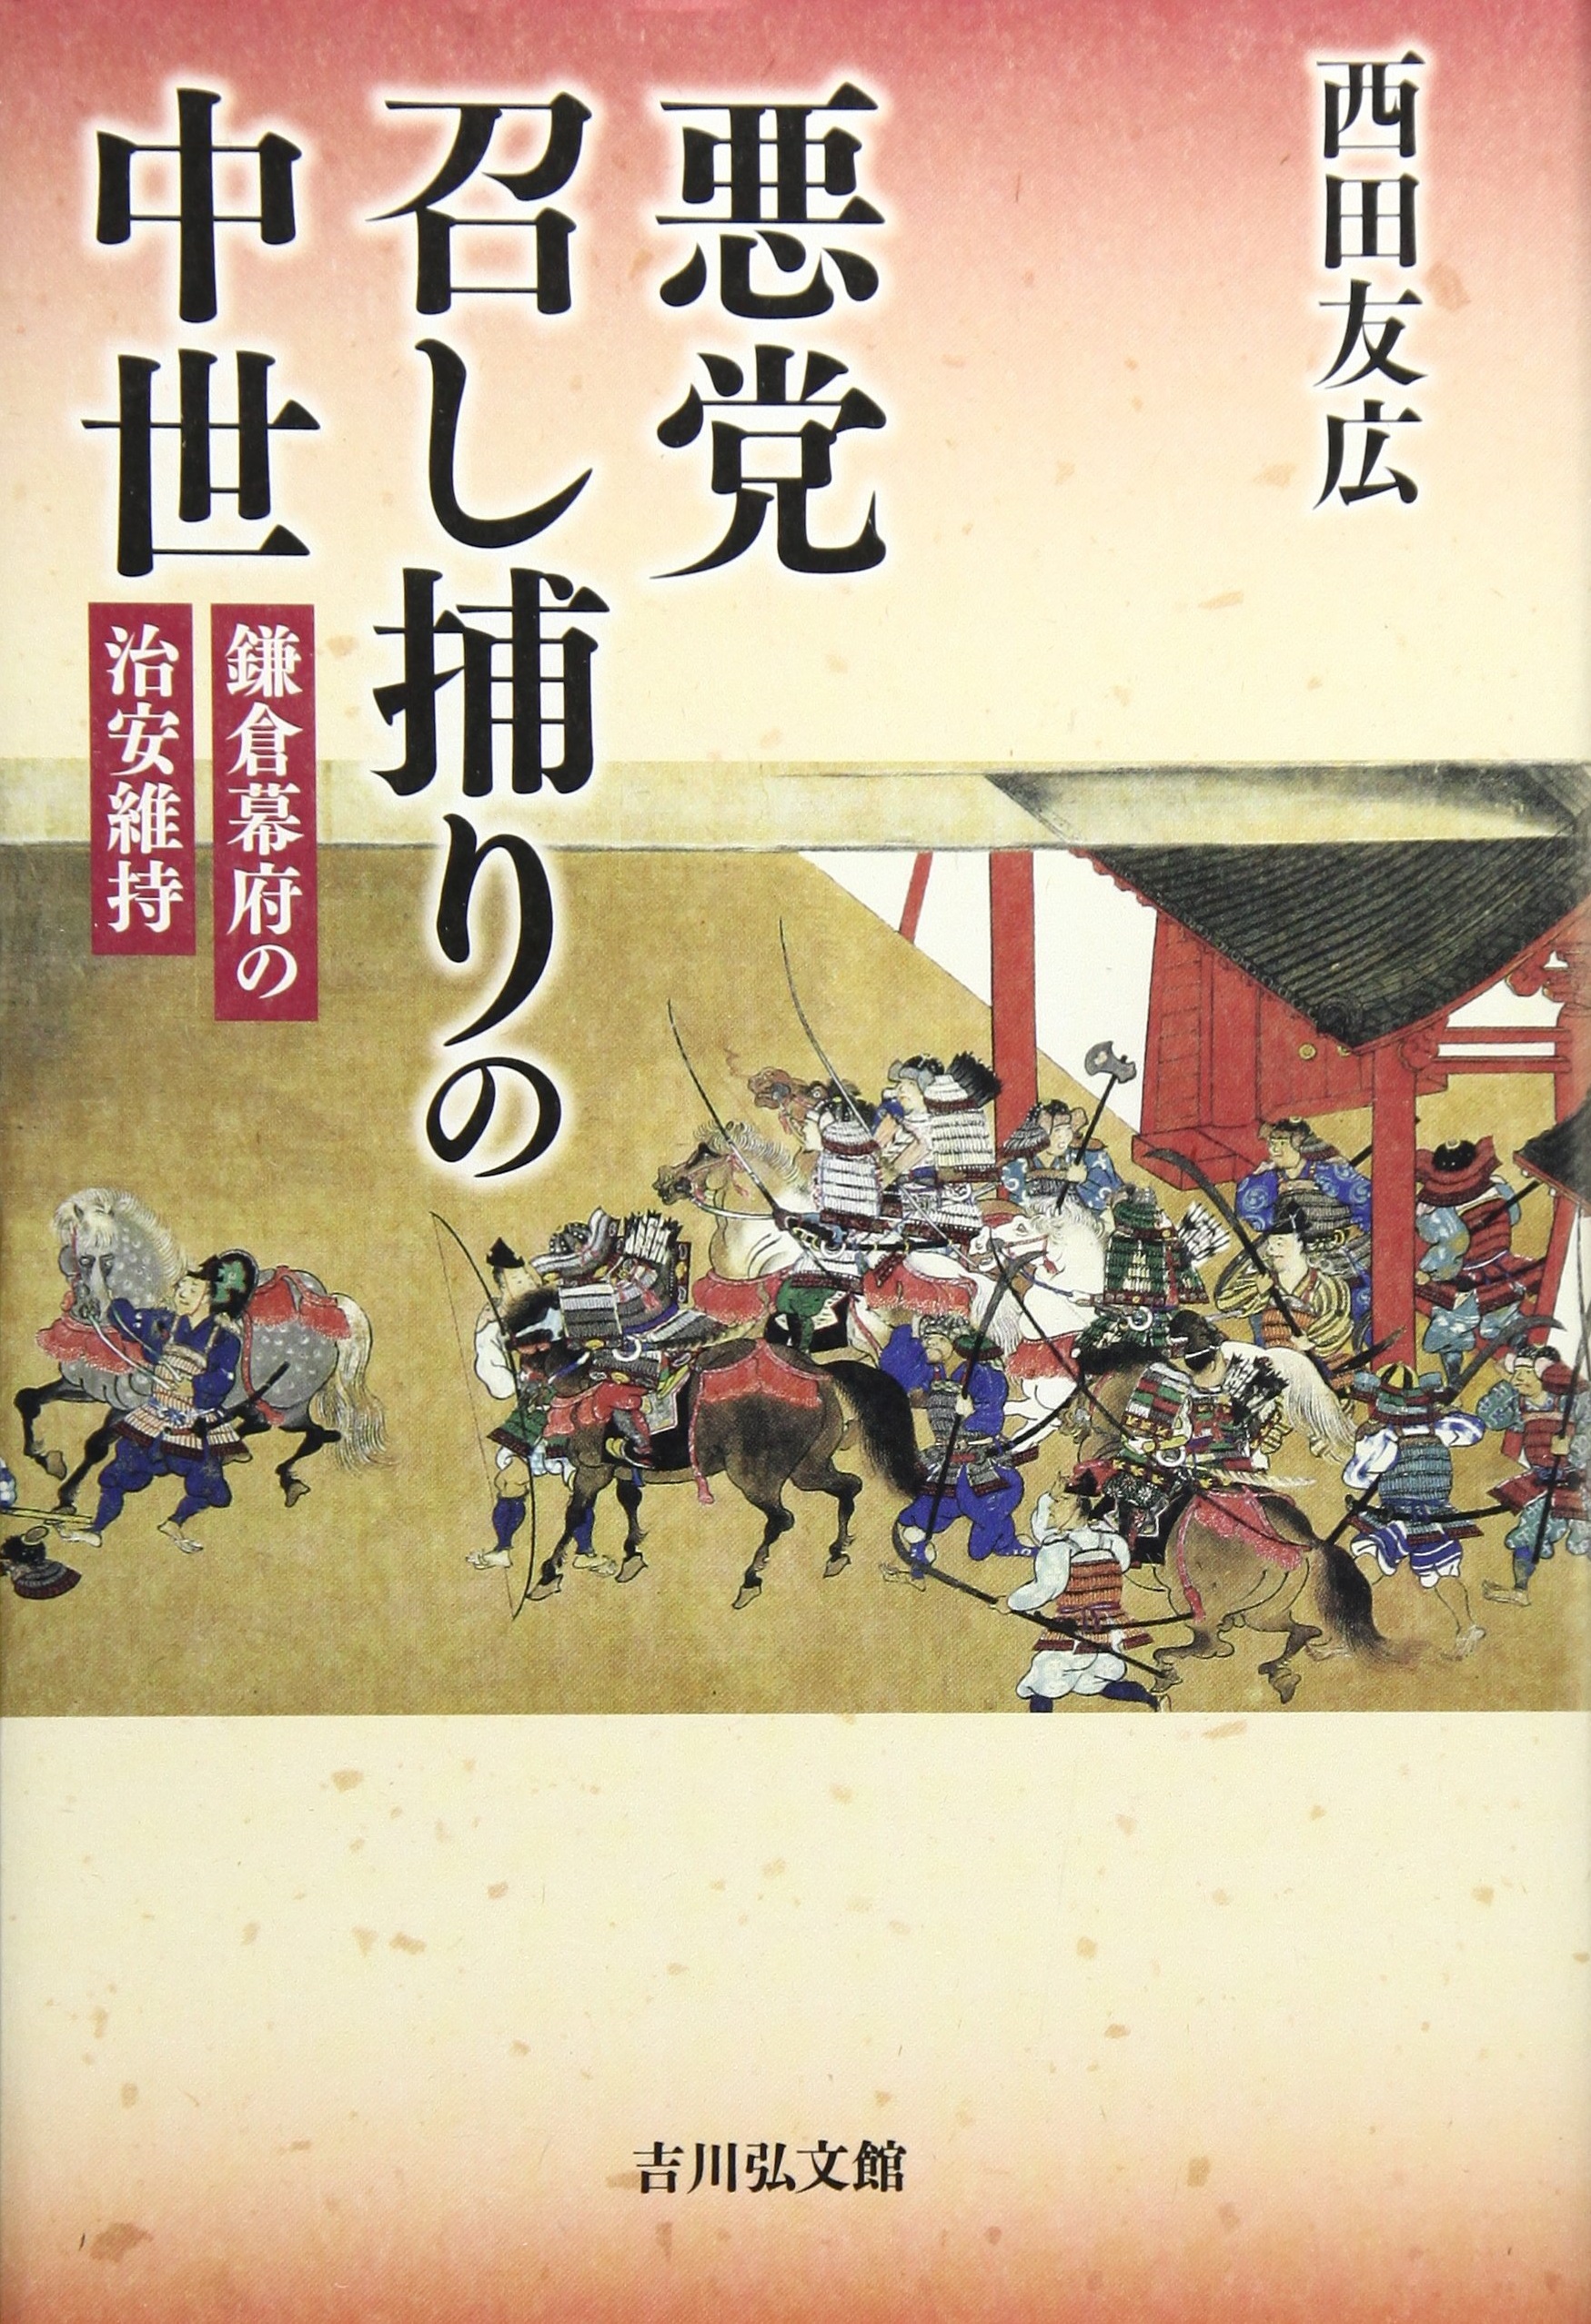 Illustration of Kamakura shogunate on a cover of white and vermilion in gradation